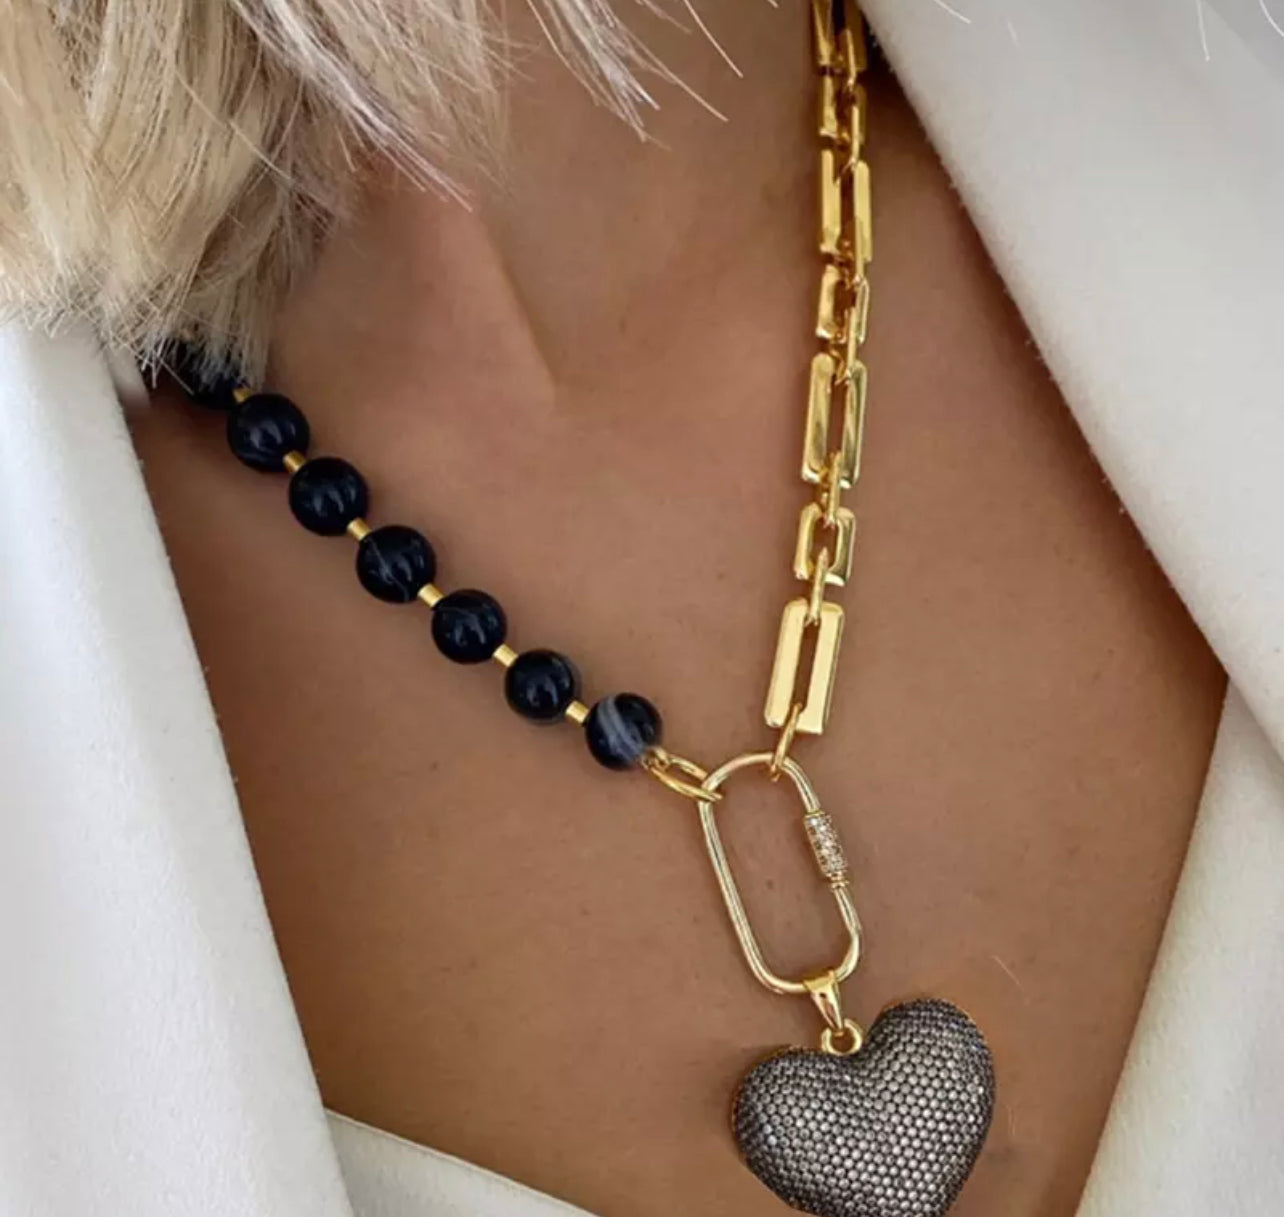 Necklace black beads gold black heart